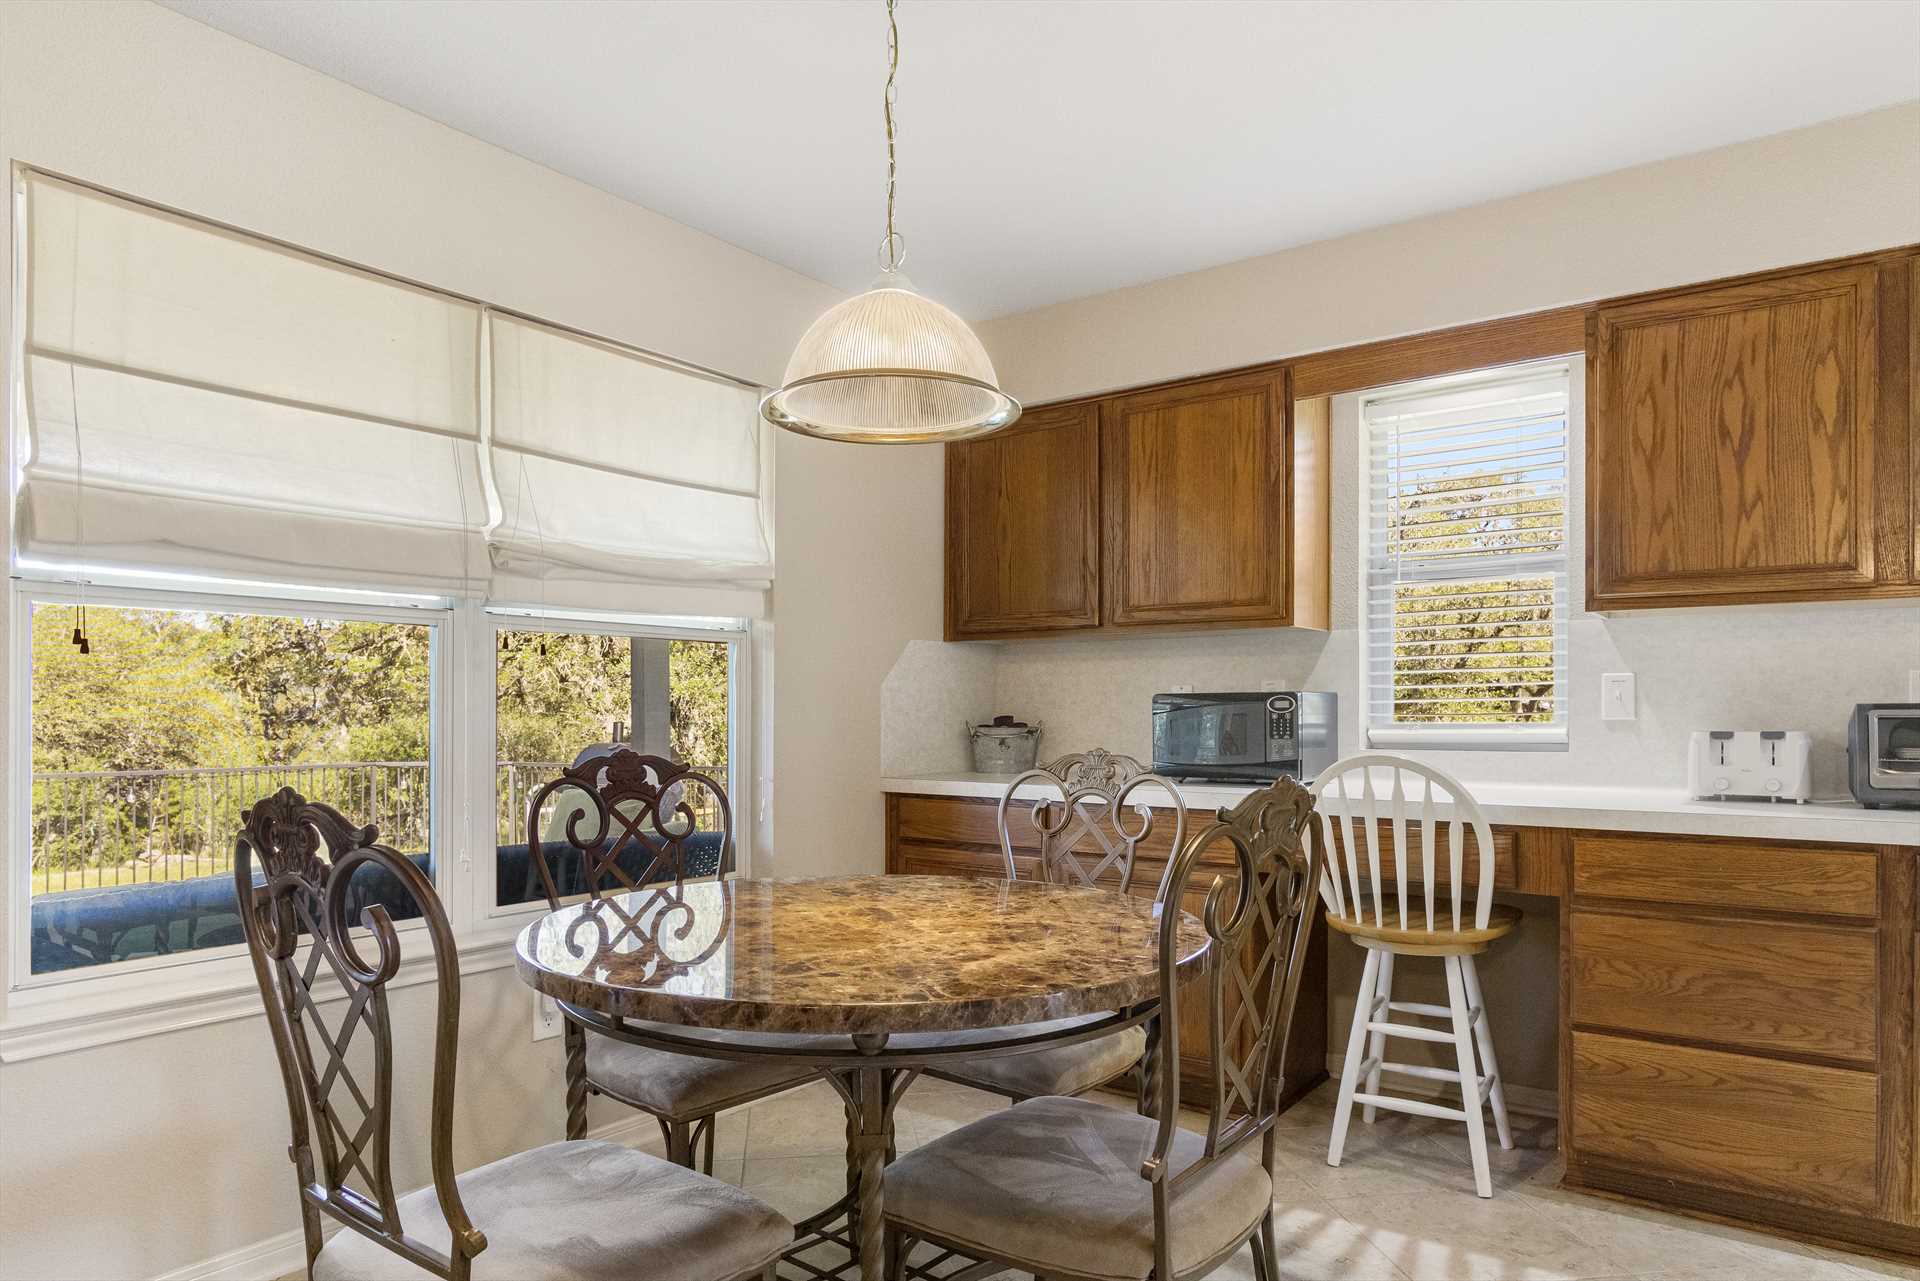                                                 The first dining room table can also serve as a breakfast nook or gaming table, with big windows nearby to allow in natural light and Hill Country beauty!